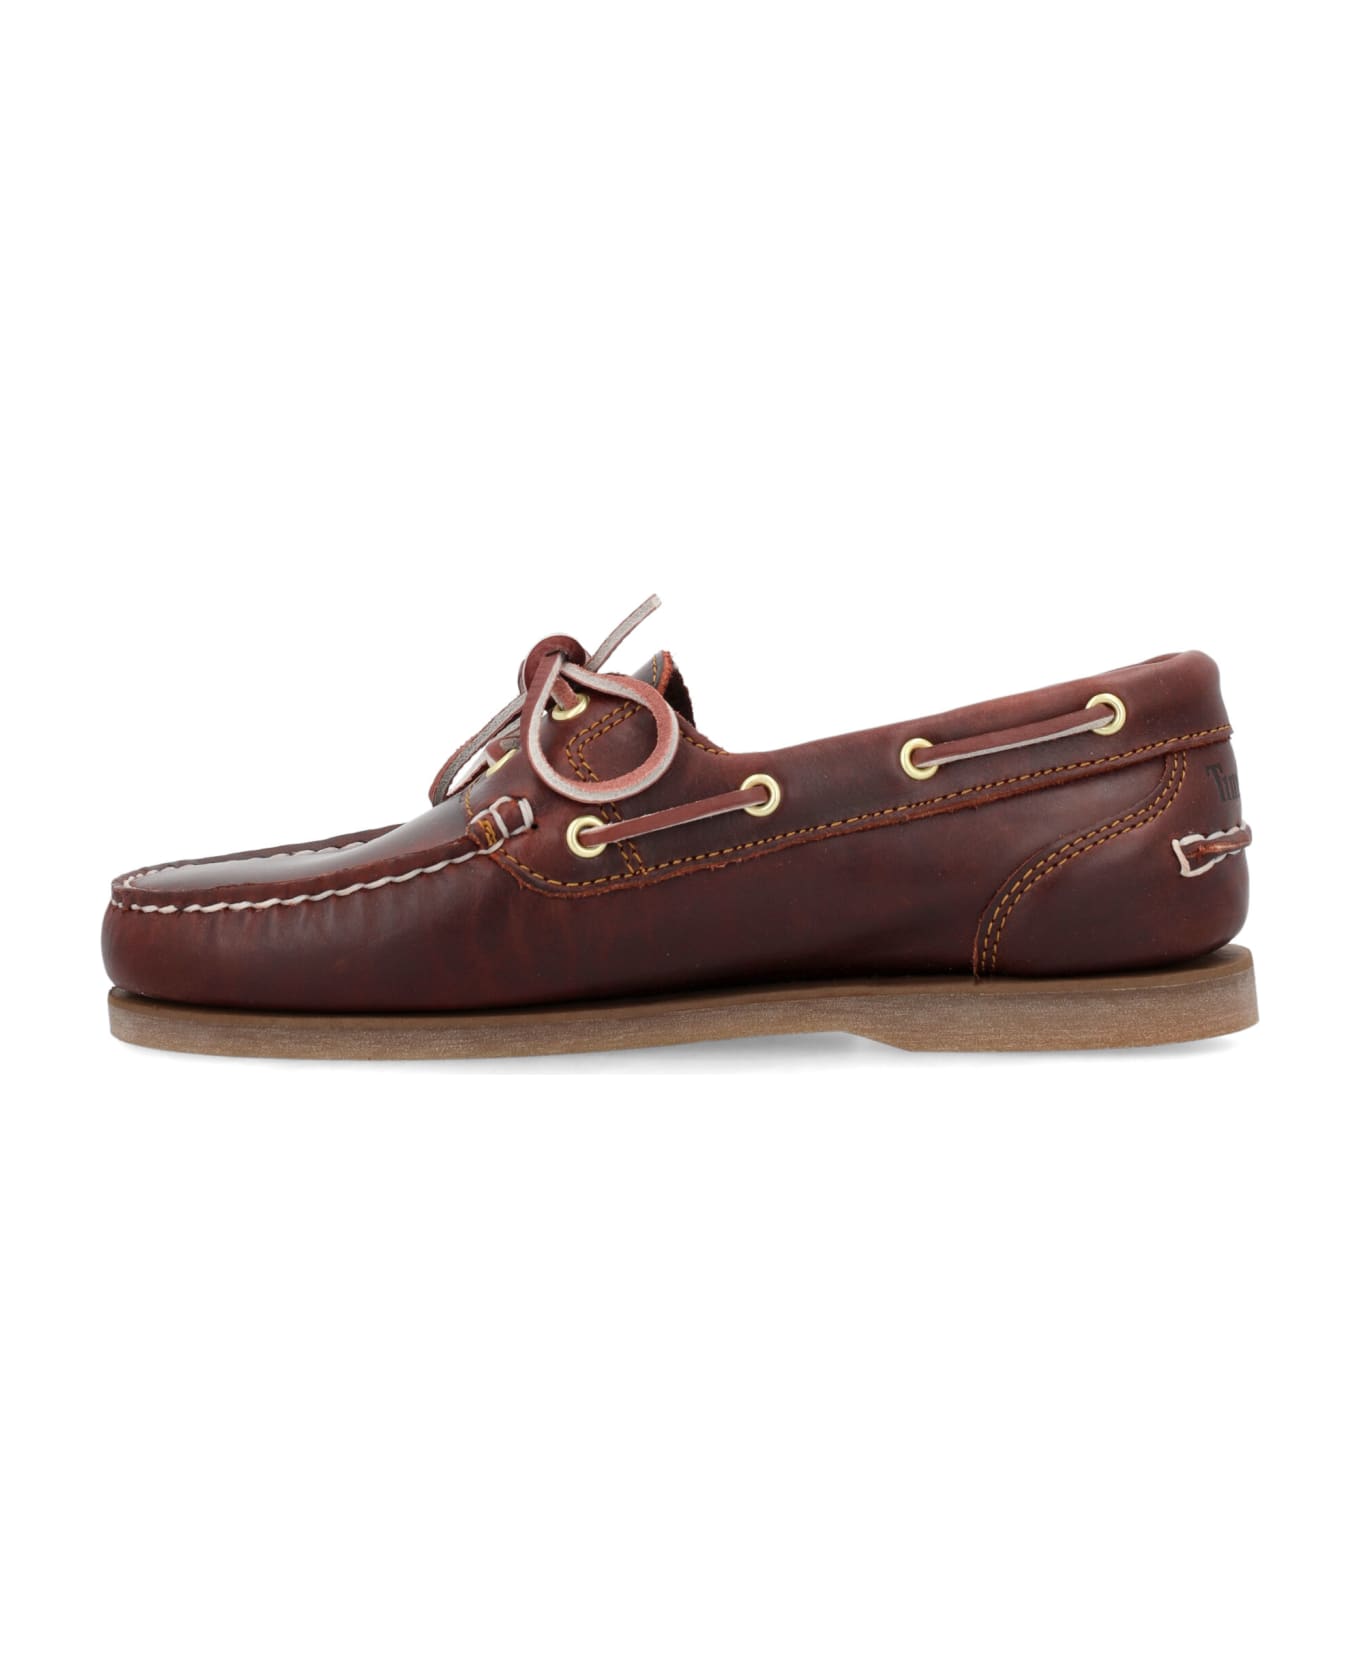 Timberland Classic Boat Shoe - MID BROWN フラットシューズ